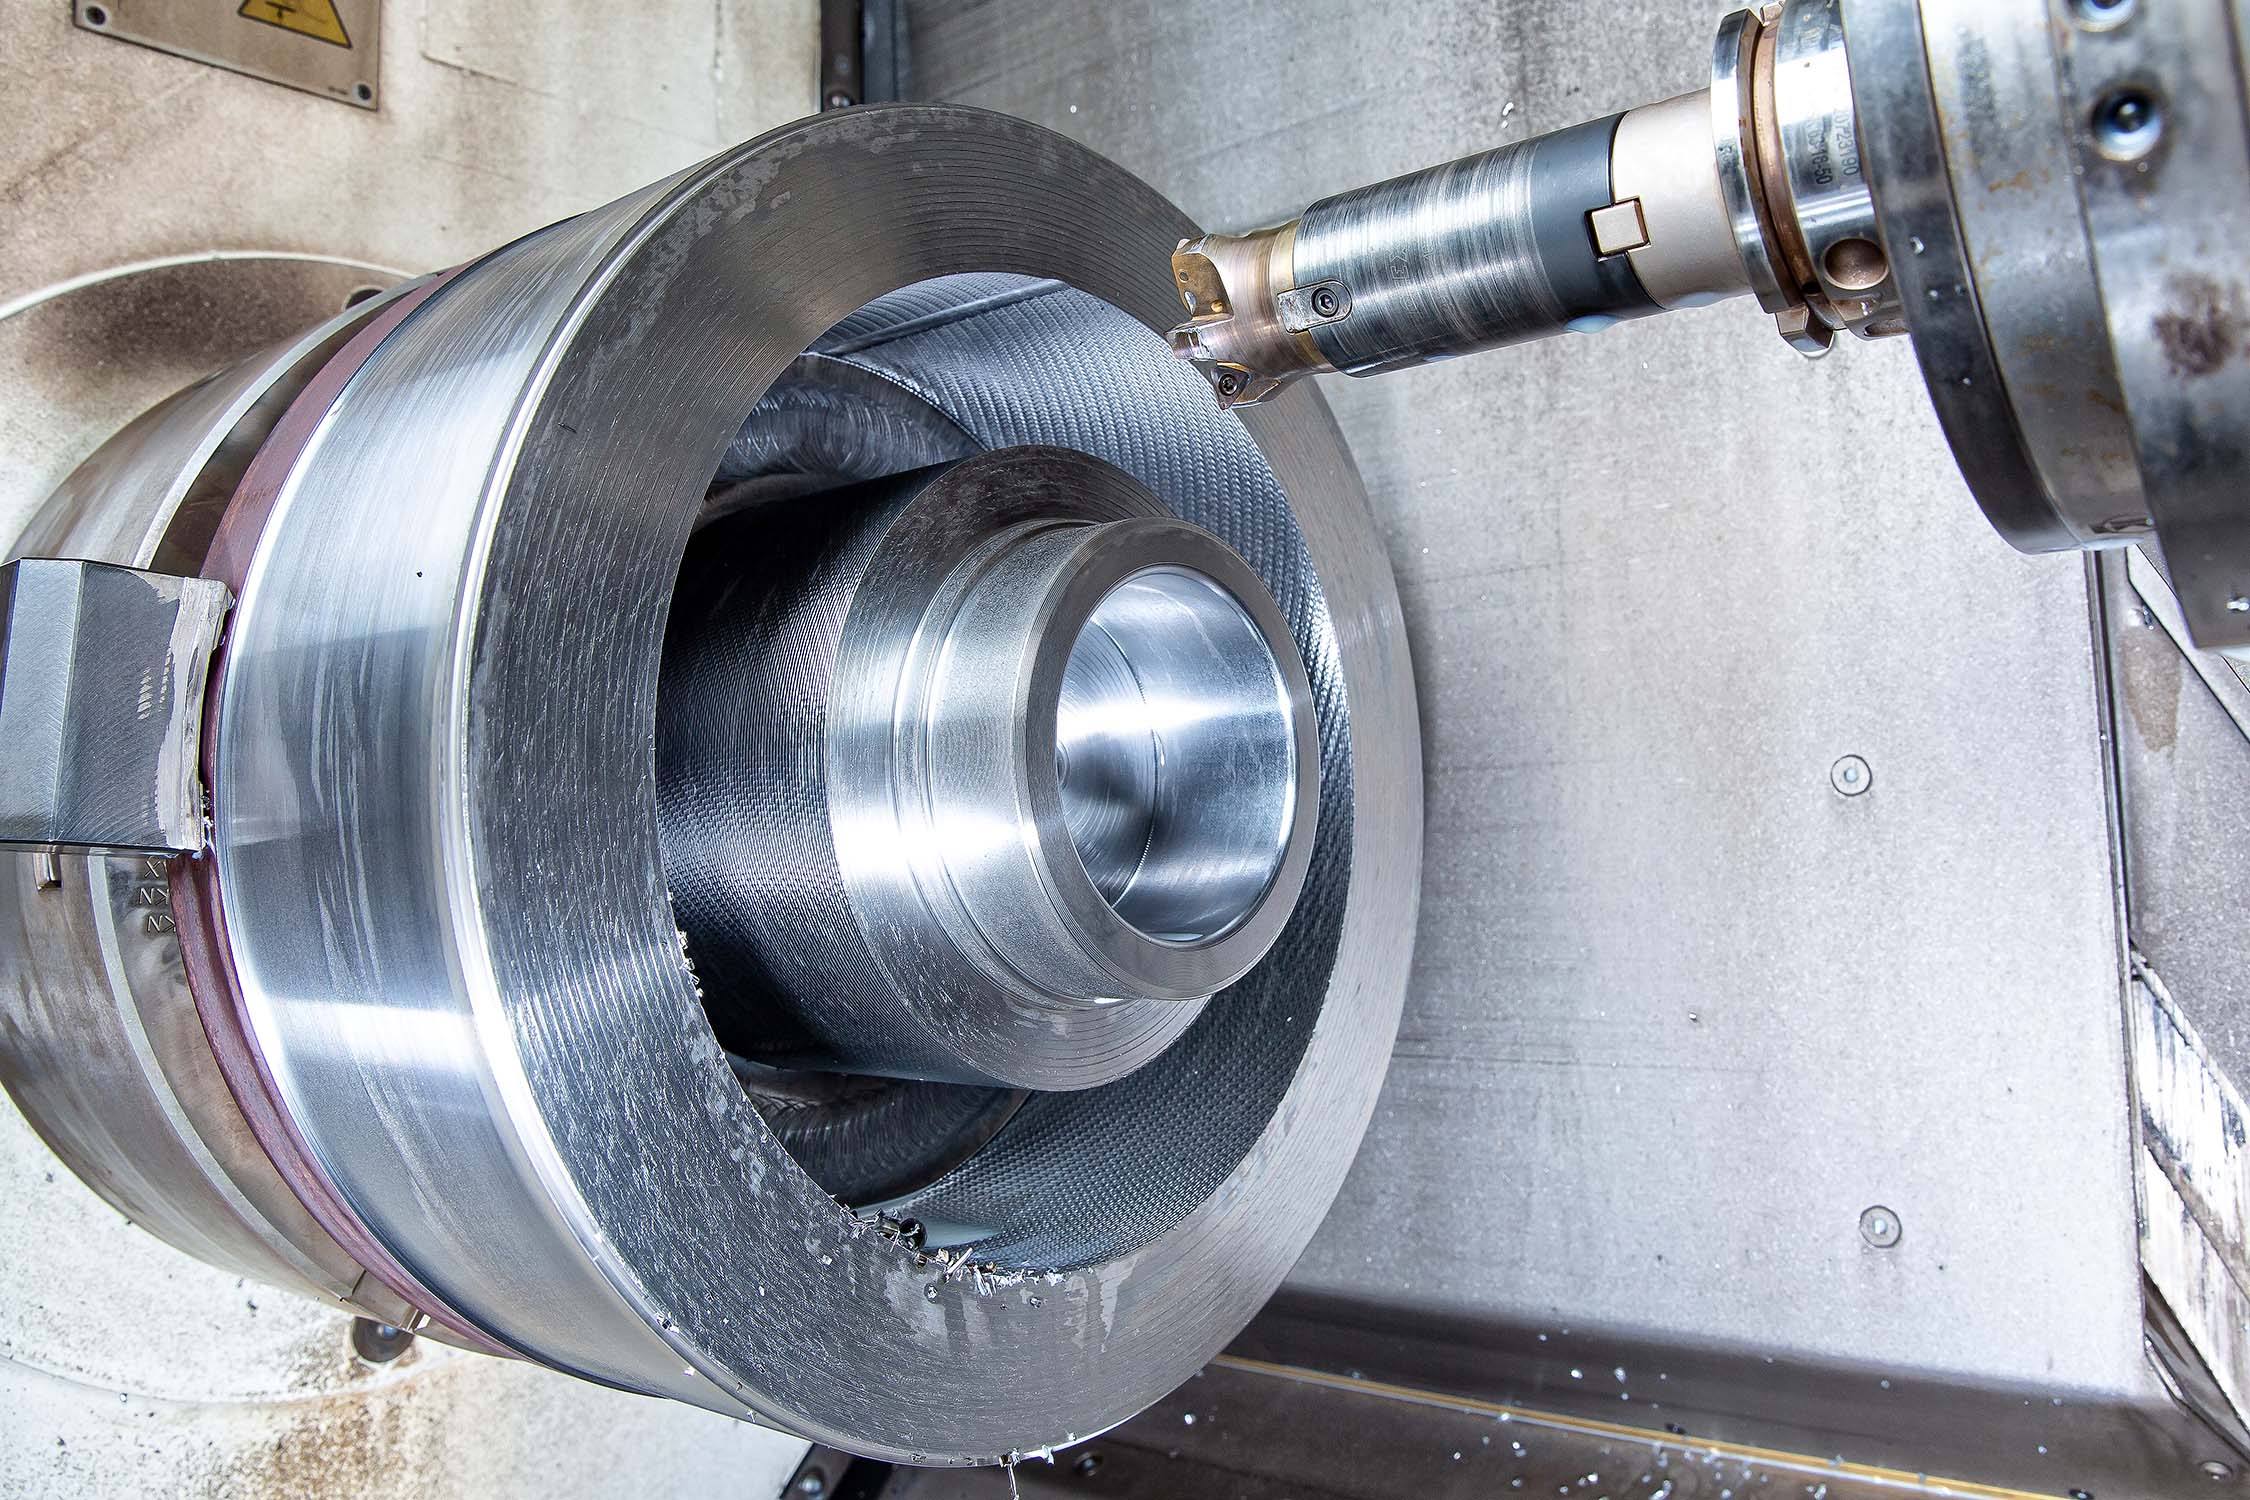 High-feed helical milling is 14 times faster